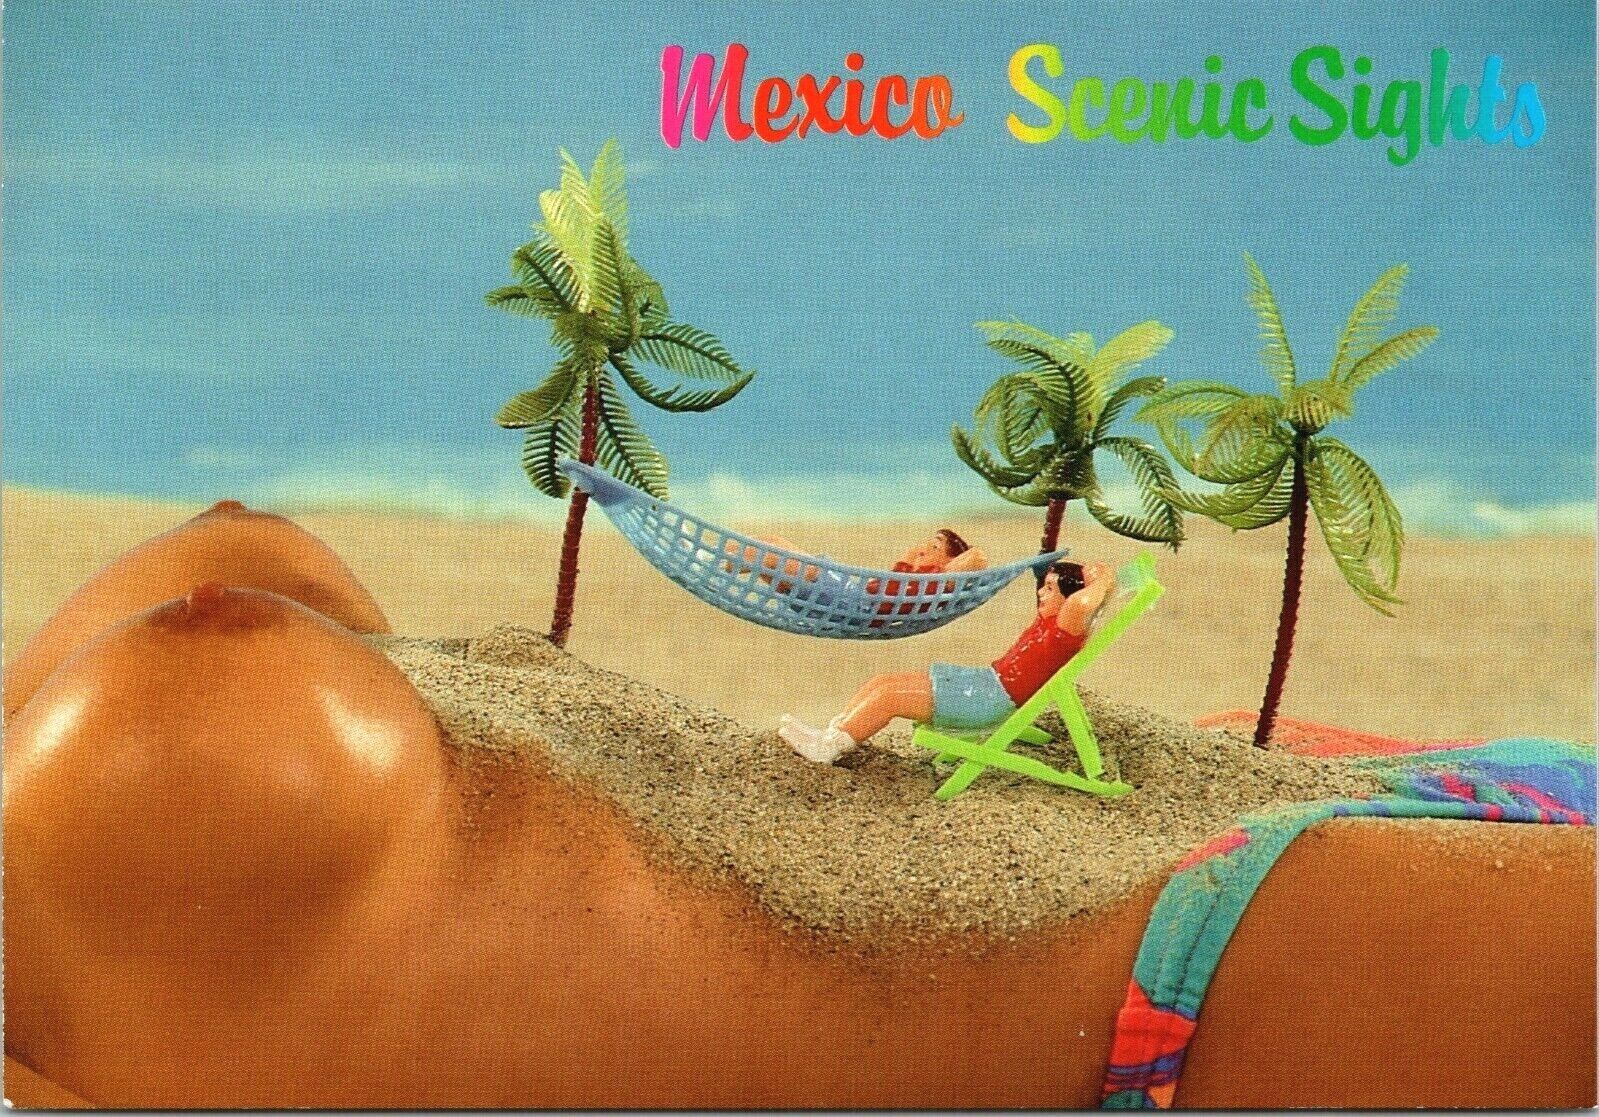 Adult Topless Girl Postcard Risque Mexico Scenic Sights Beach Ocean